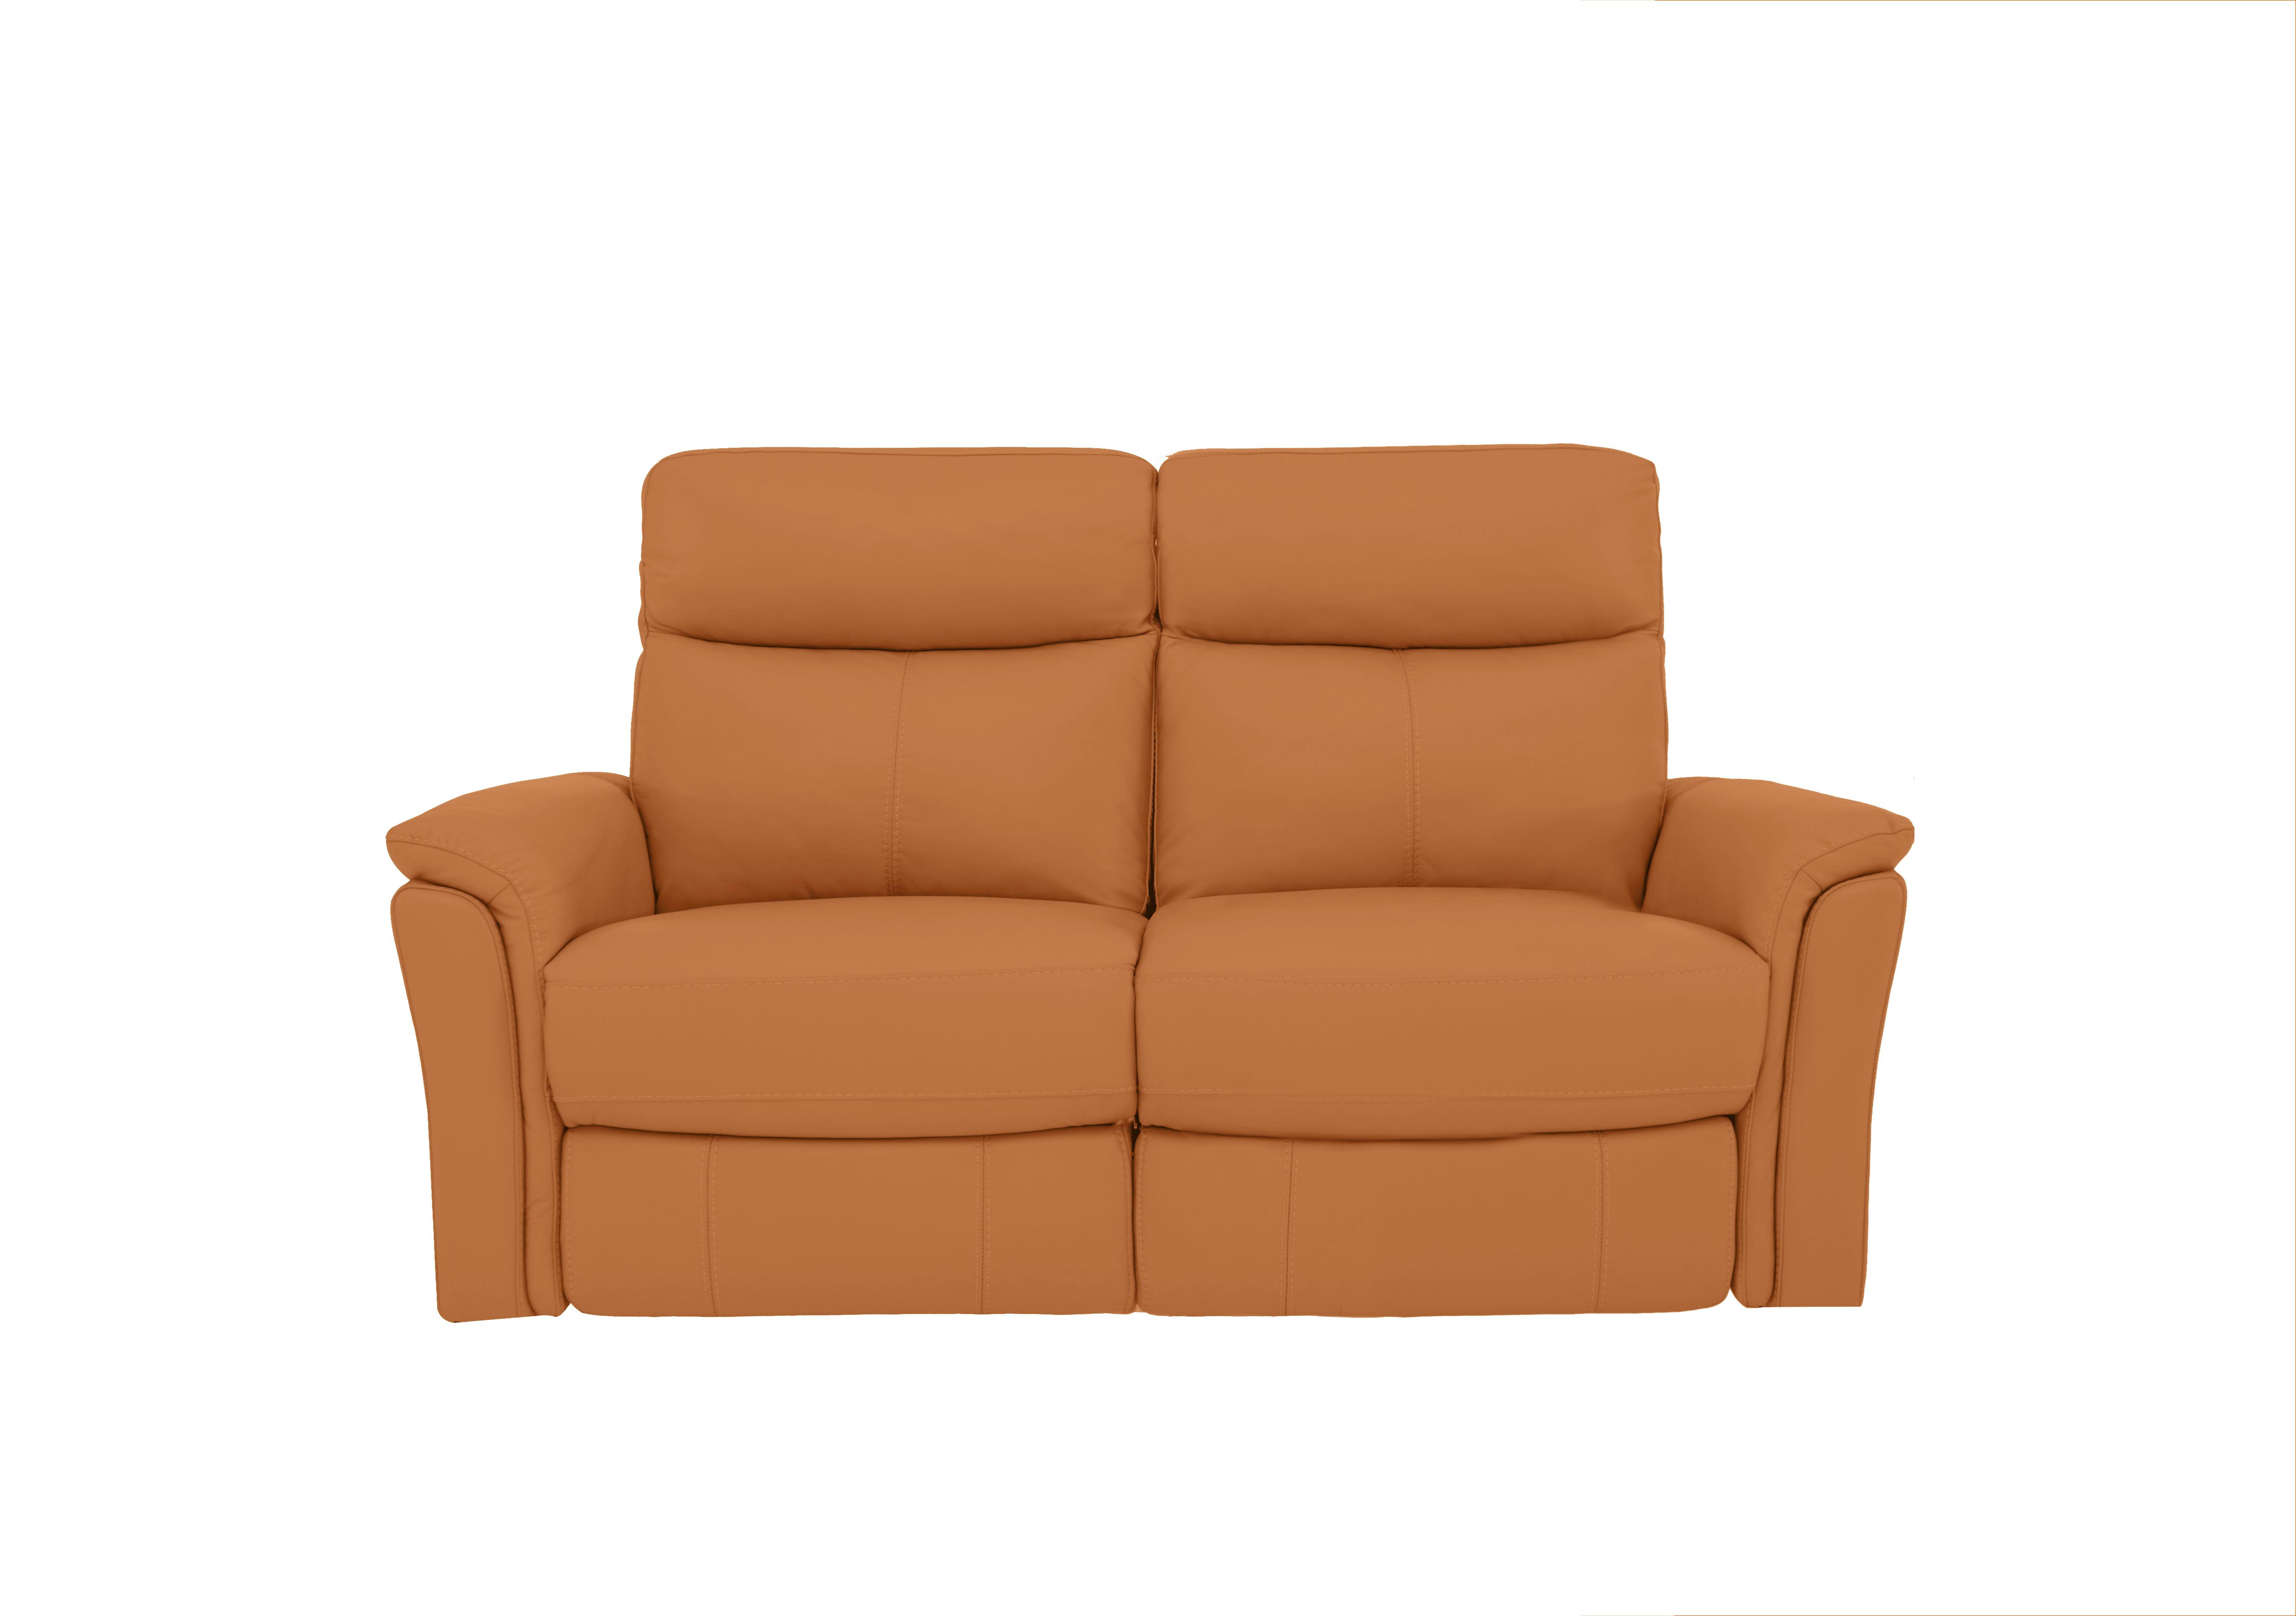 Compact Collection Piccolo 2 Seater Sofa in Bv-335e Honey Yellow on Furniture Village